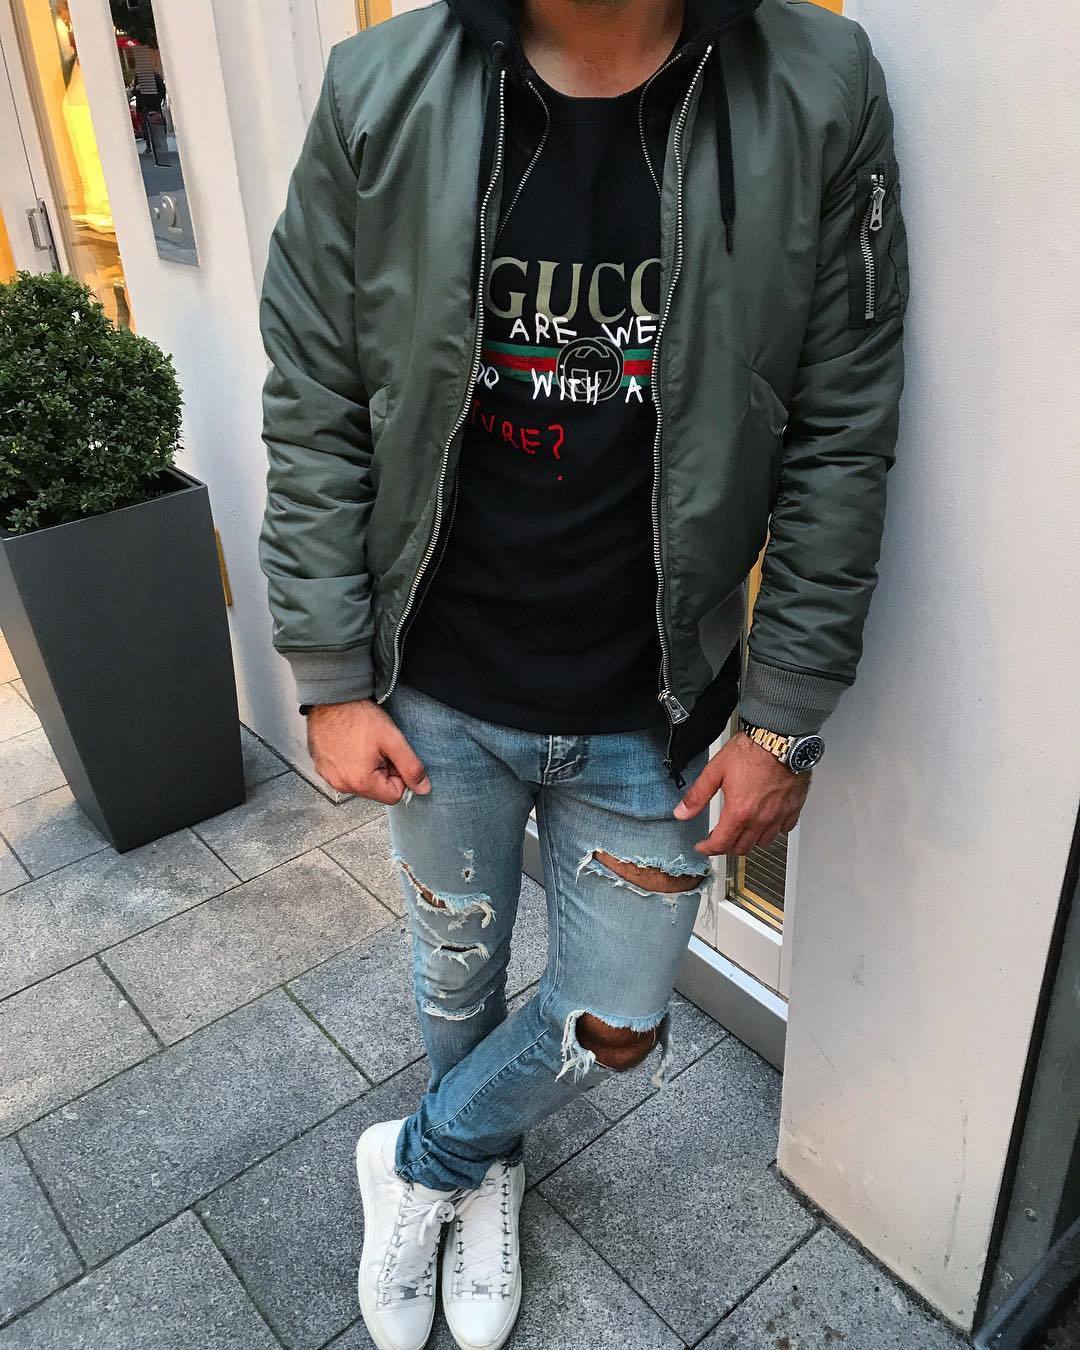 Gucci T-Shirts, Hoodies, & Sneakers for Men